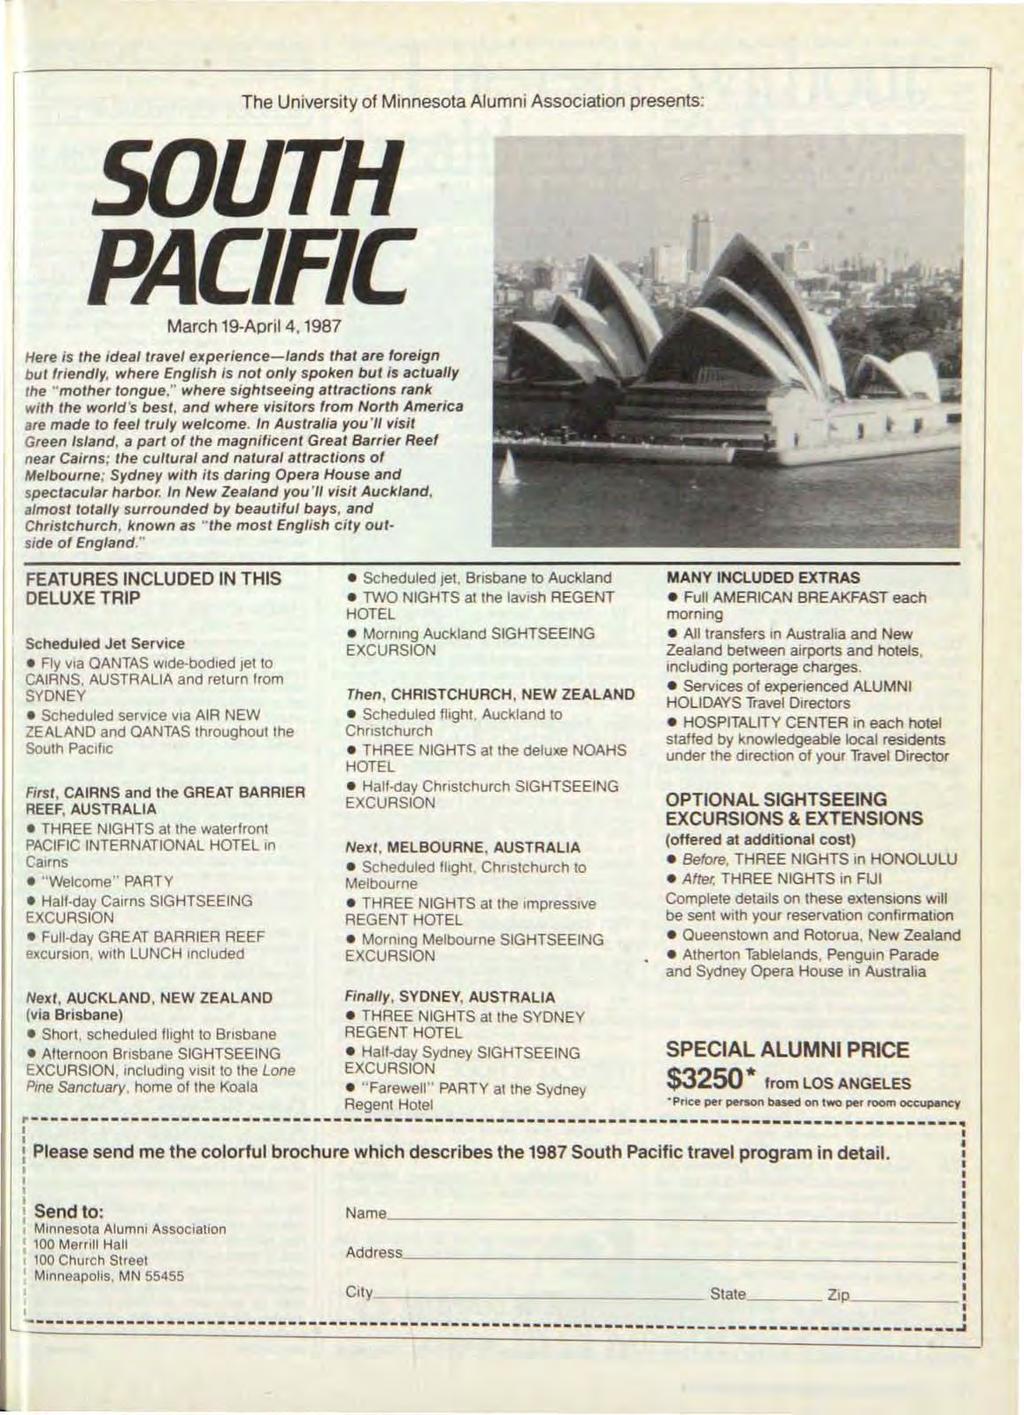 The University of Minnesota Alumni Association presents: SOUTH PACIFIC March 19-Aori14, 1987 Here is the ideal travel expe'rience- lands that are foreign but friendly, where English is not only